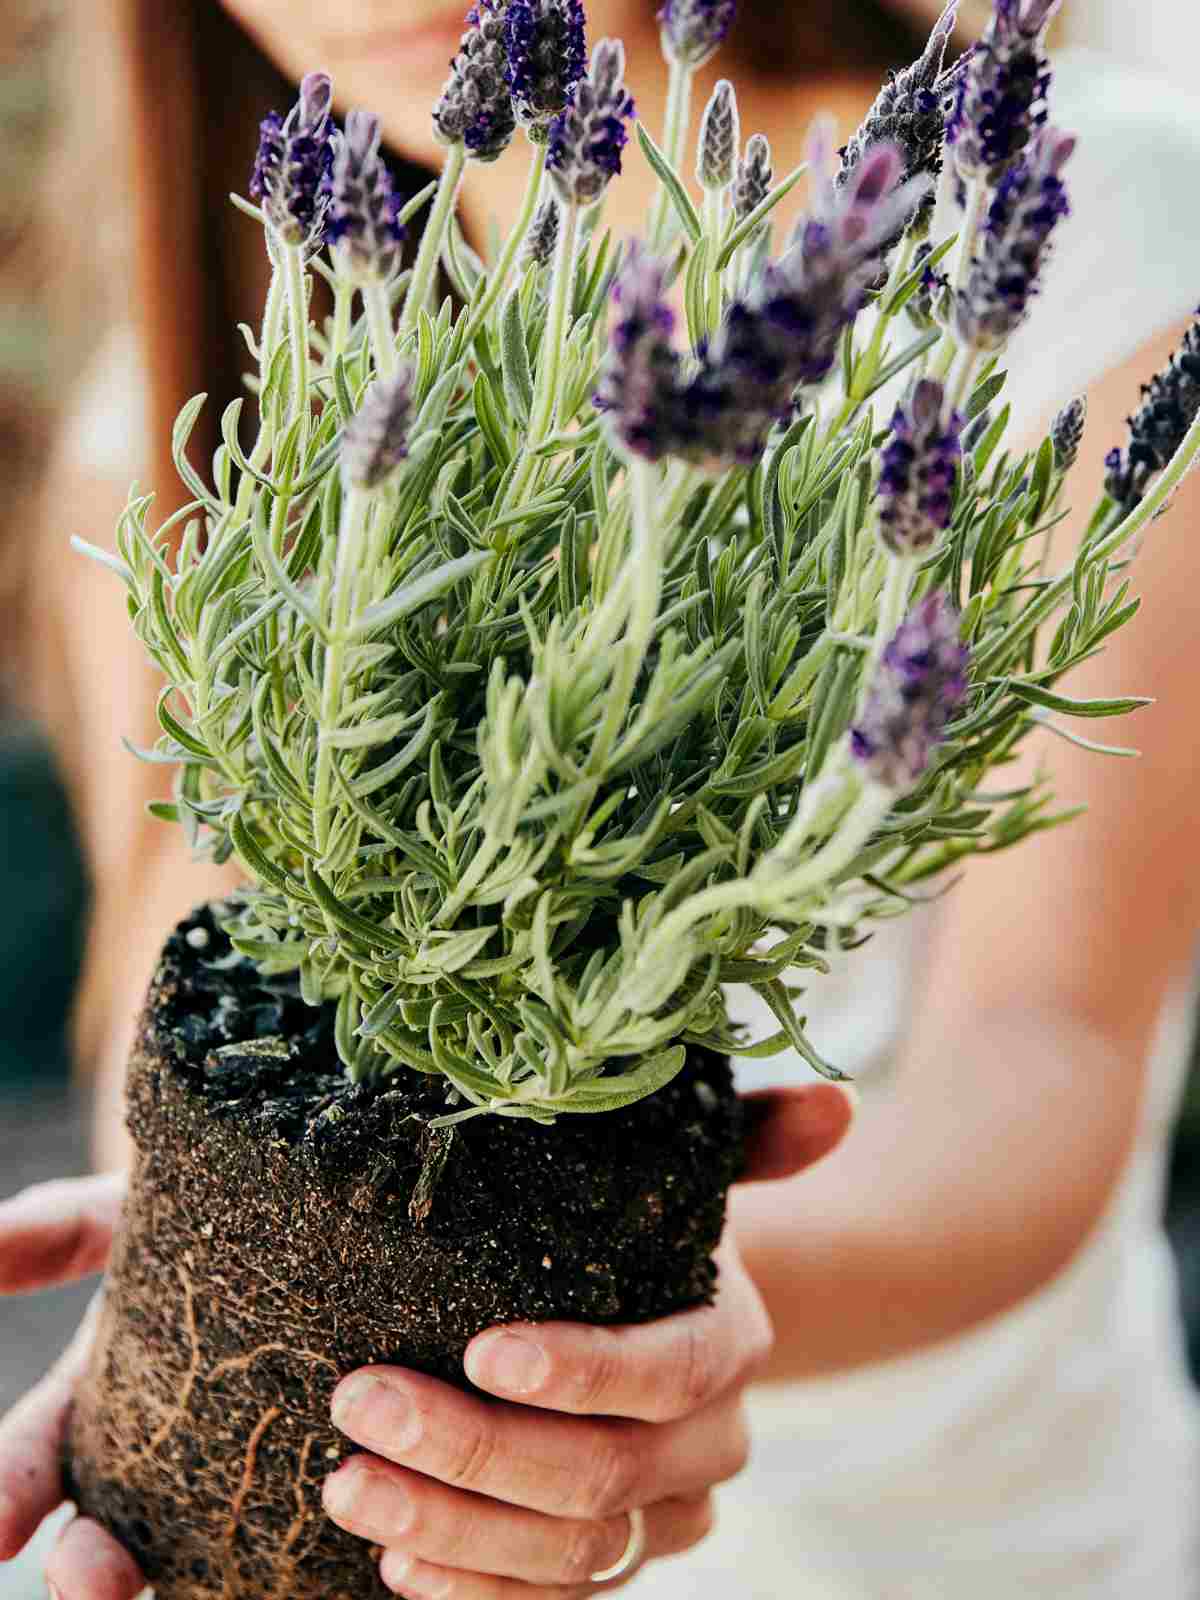 How To Grow Lavender Plants Indoors